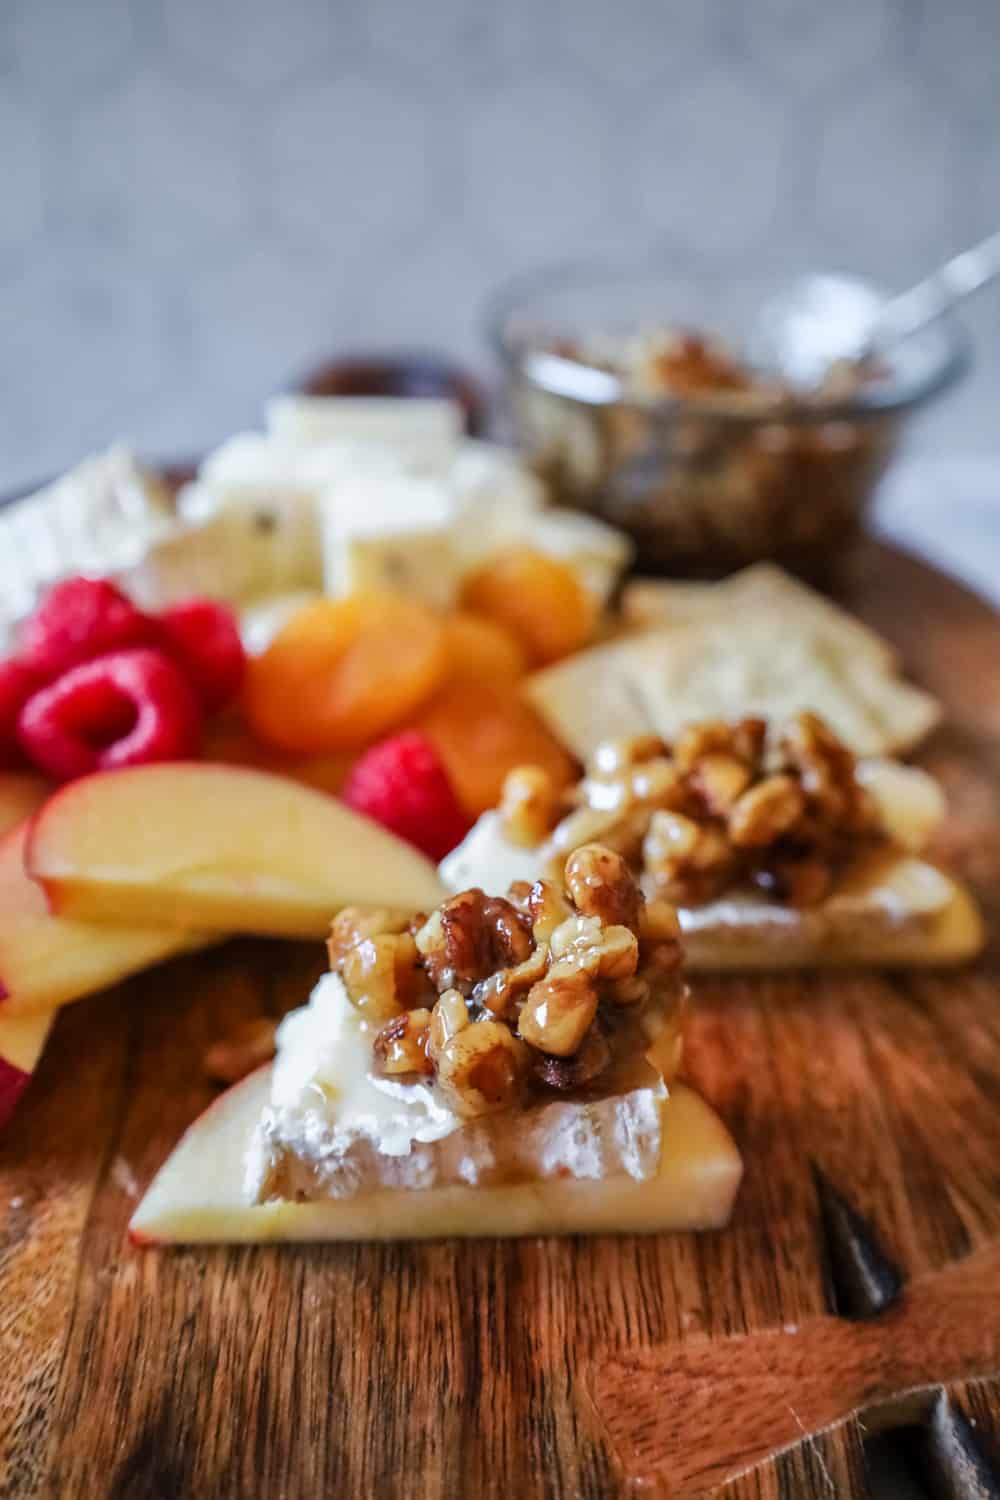 wet walnuts on apple slices topped with brie on a cheeseboard